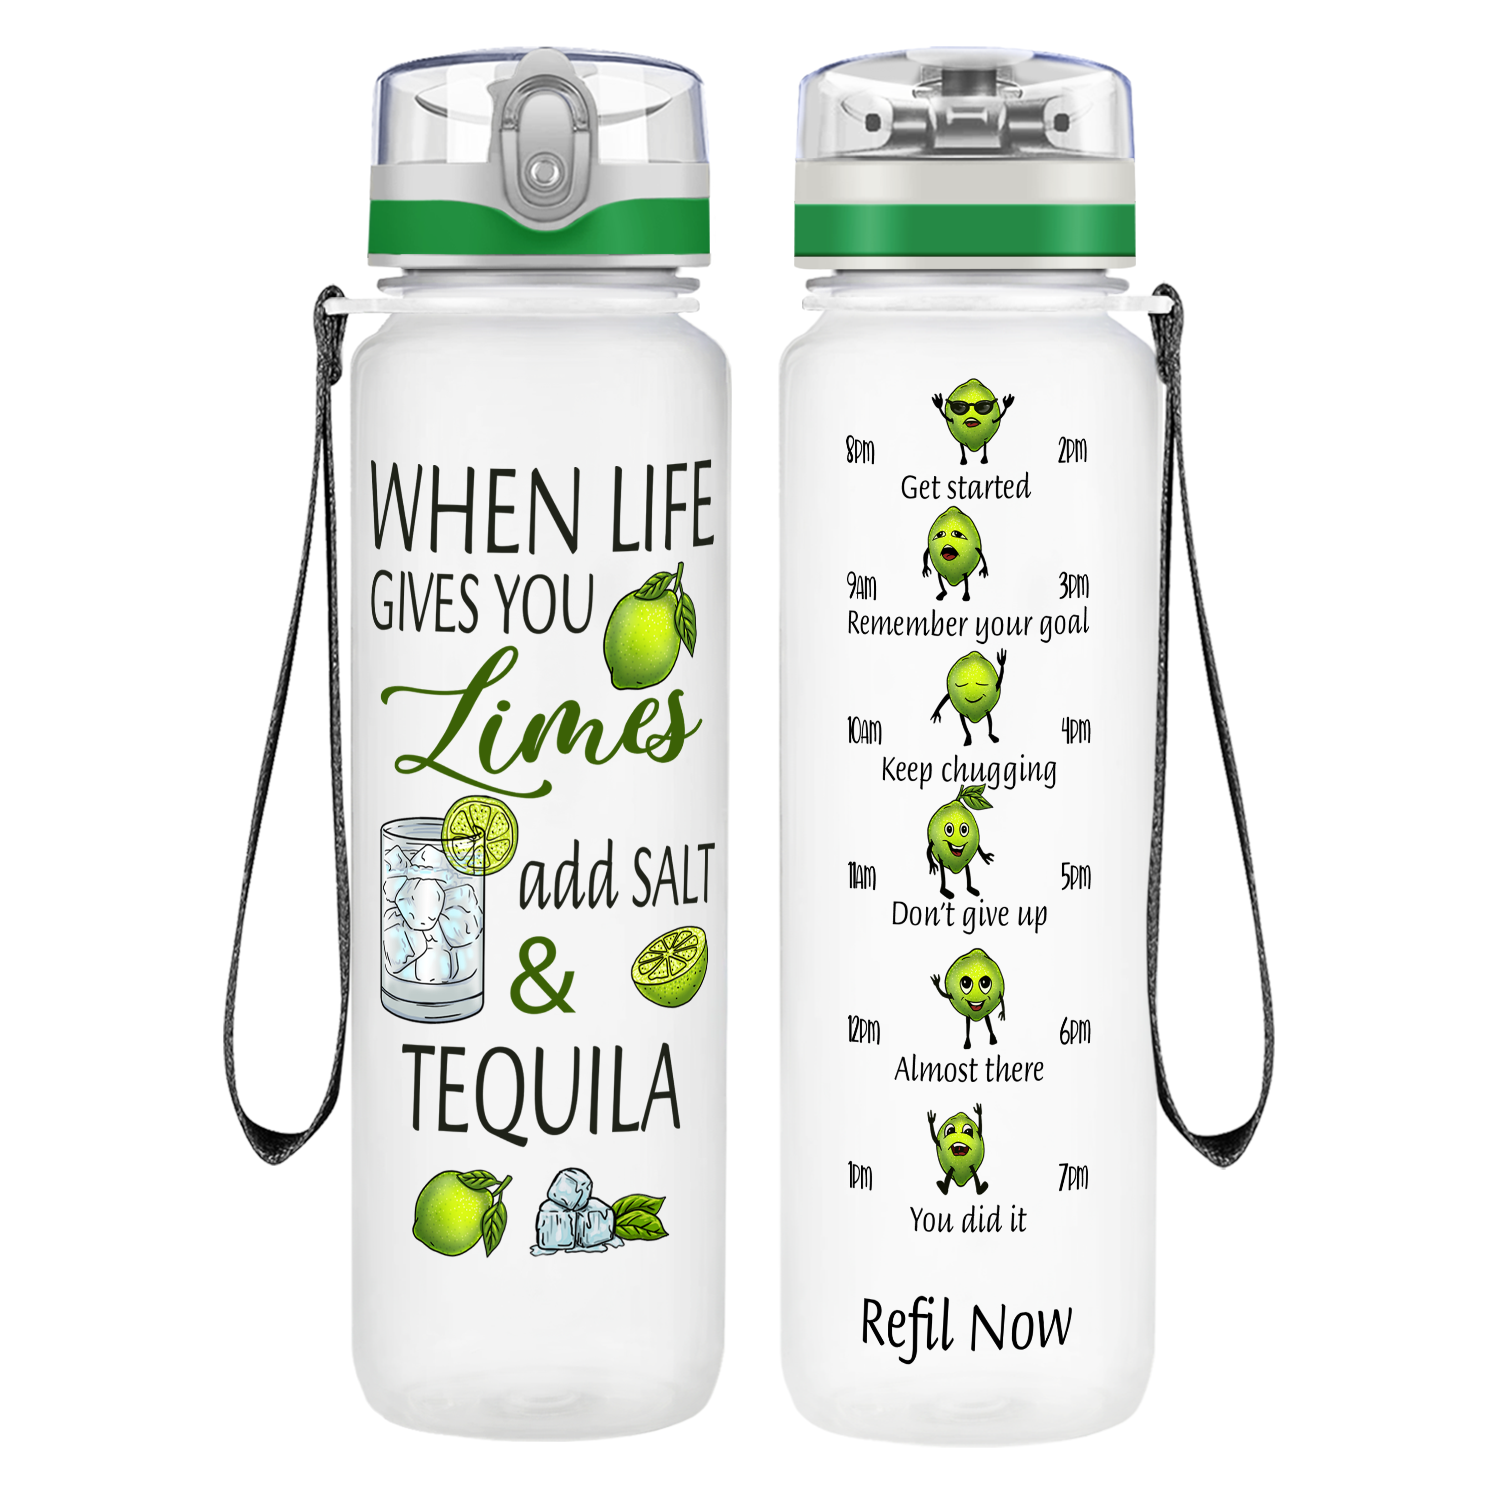 When Life Gives you Limes Add Salt and Tequila on 32 oz Motivational Tracking Water Bottle